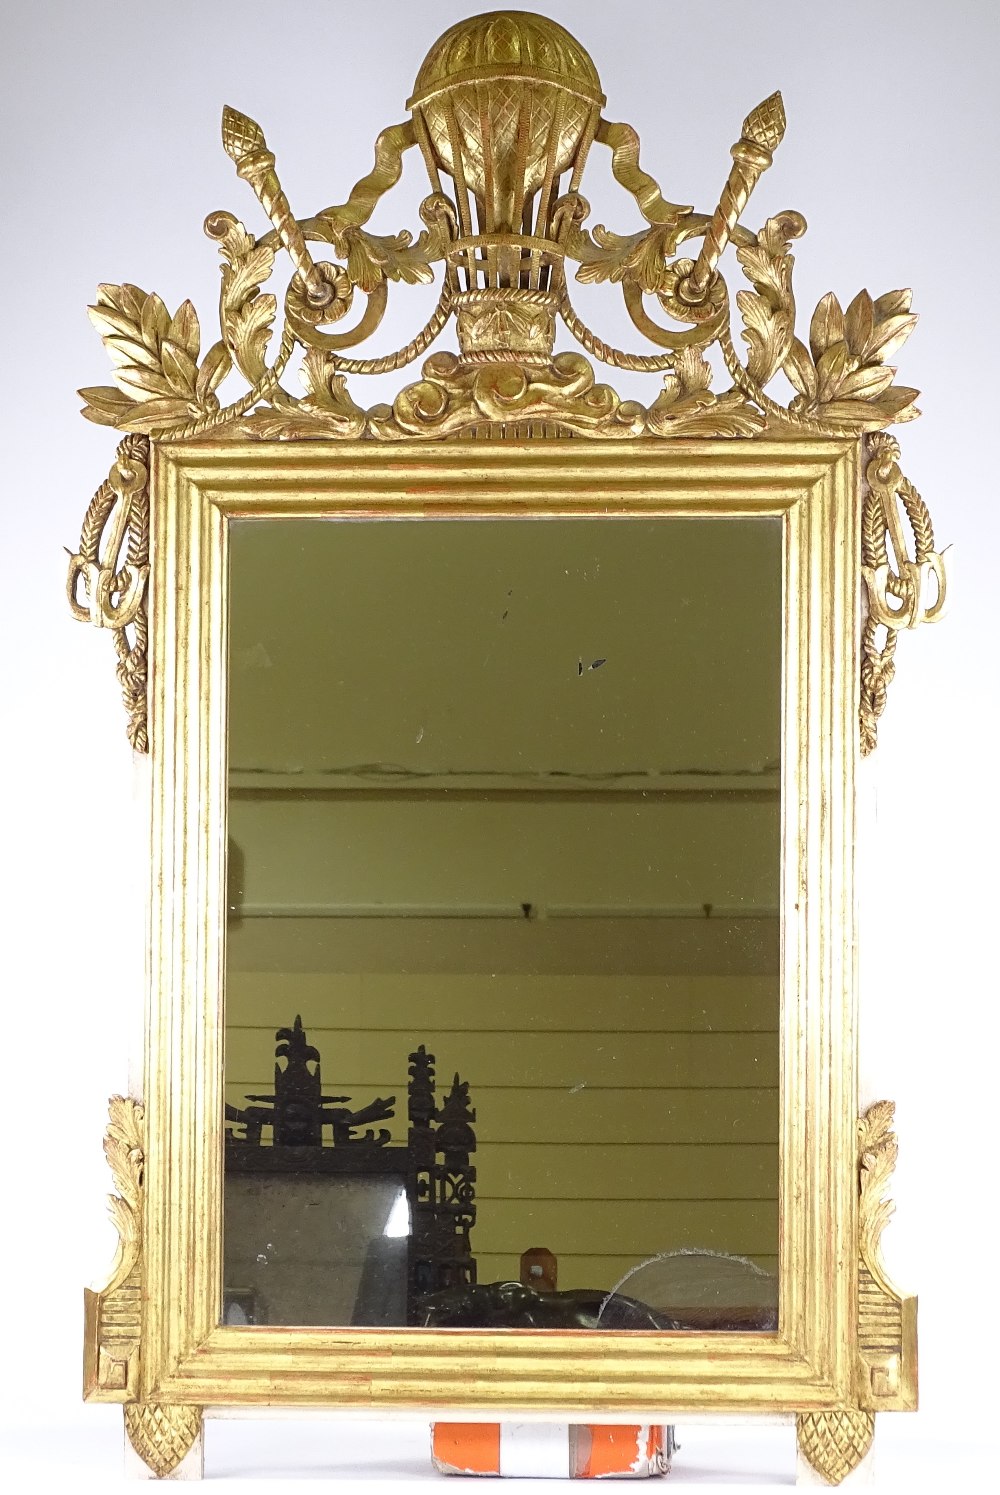 An ornate carved and gilded wood-framed wall mirror in Louis XVI style, with carved and pierced